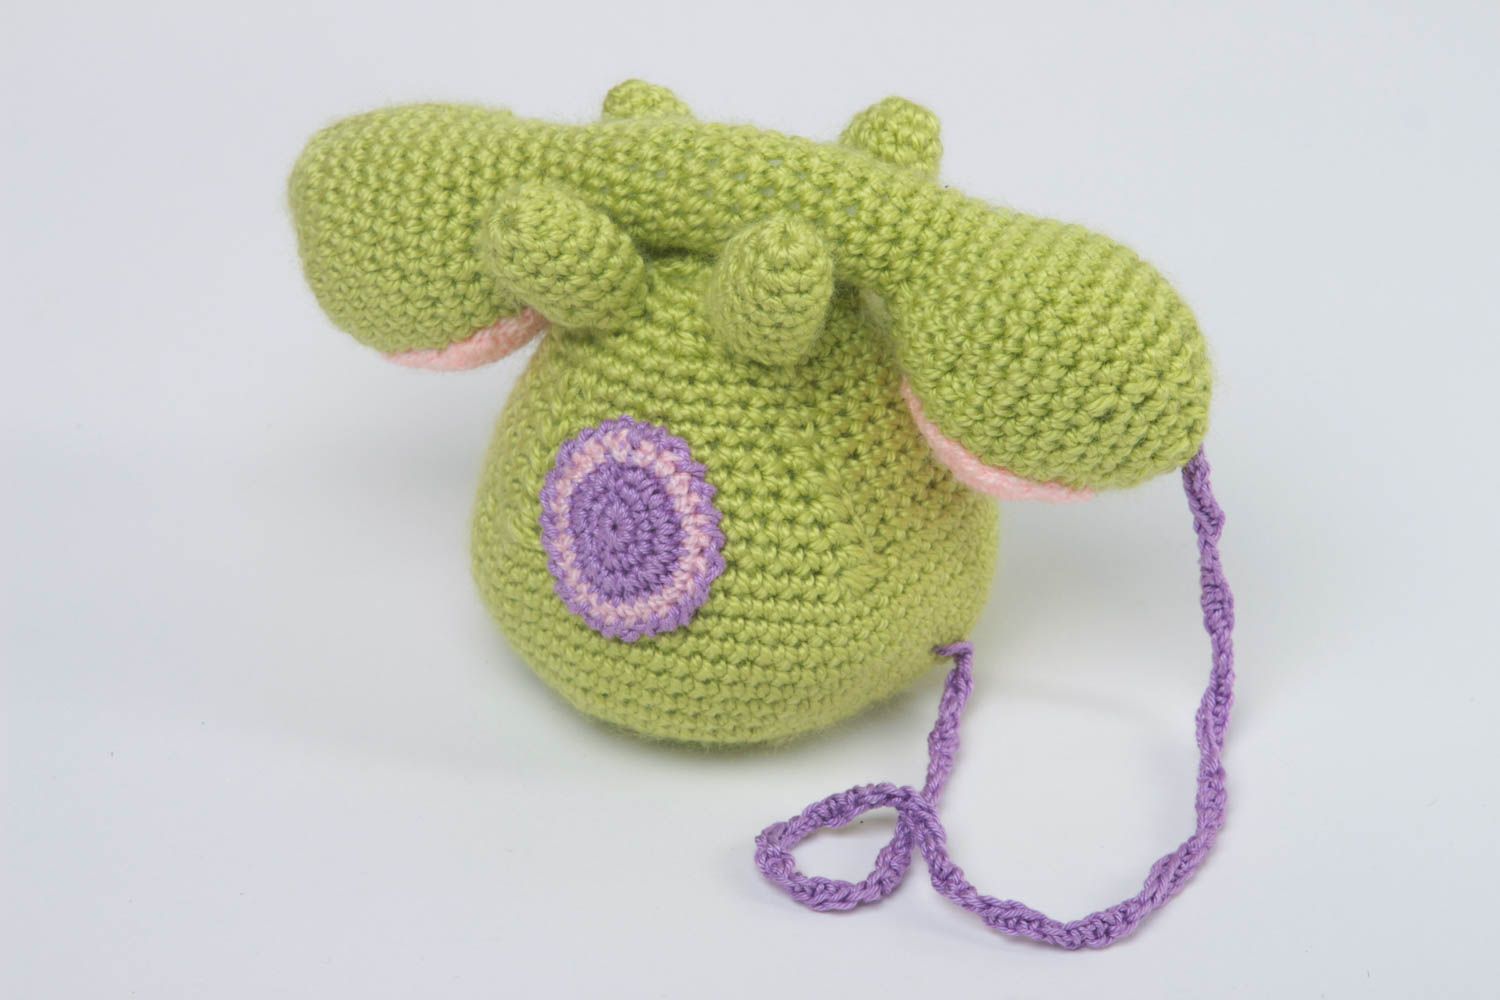 Handmade crocheted toy for children nursery decor stuffed toy for babies photo 2